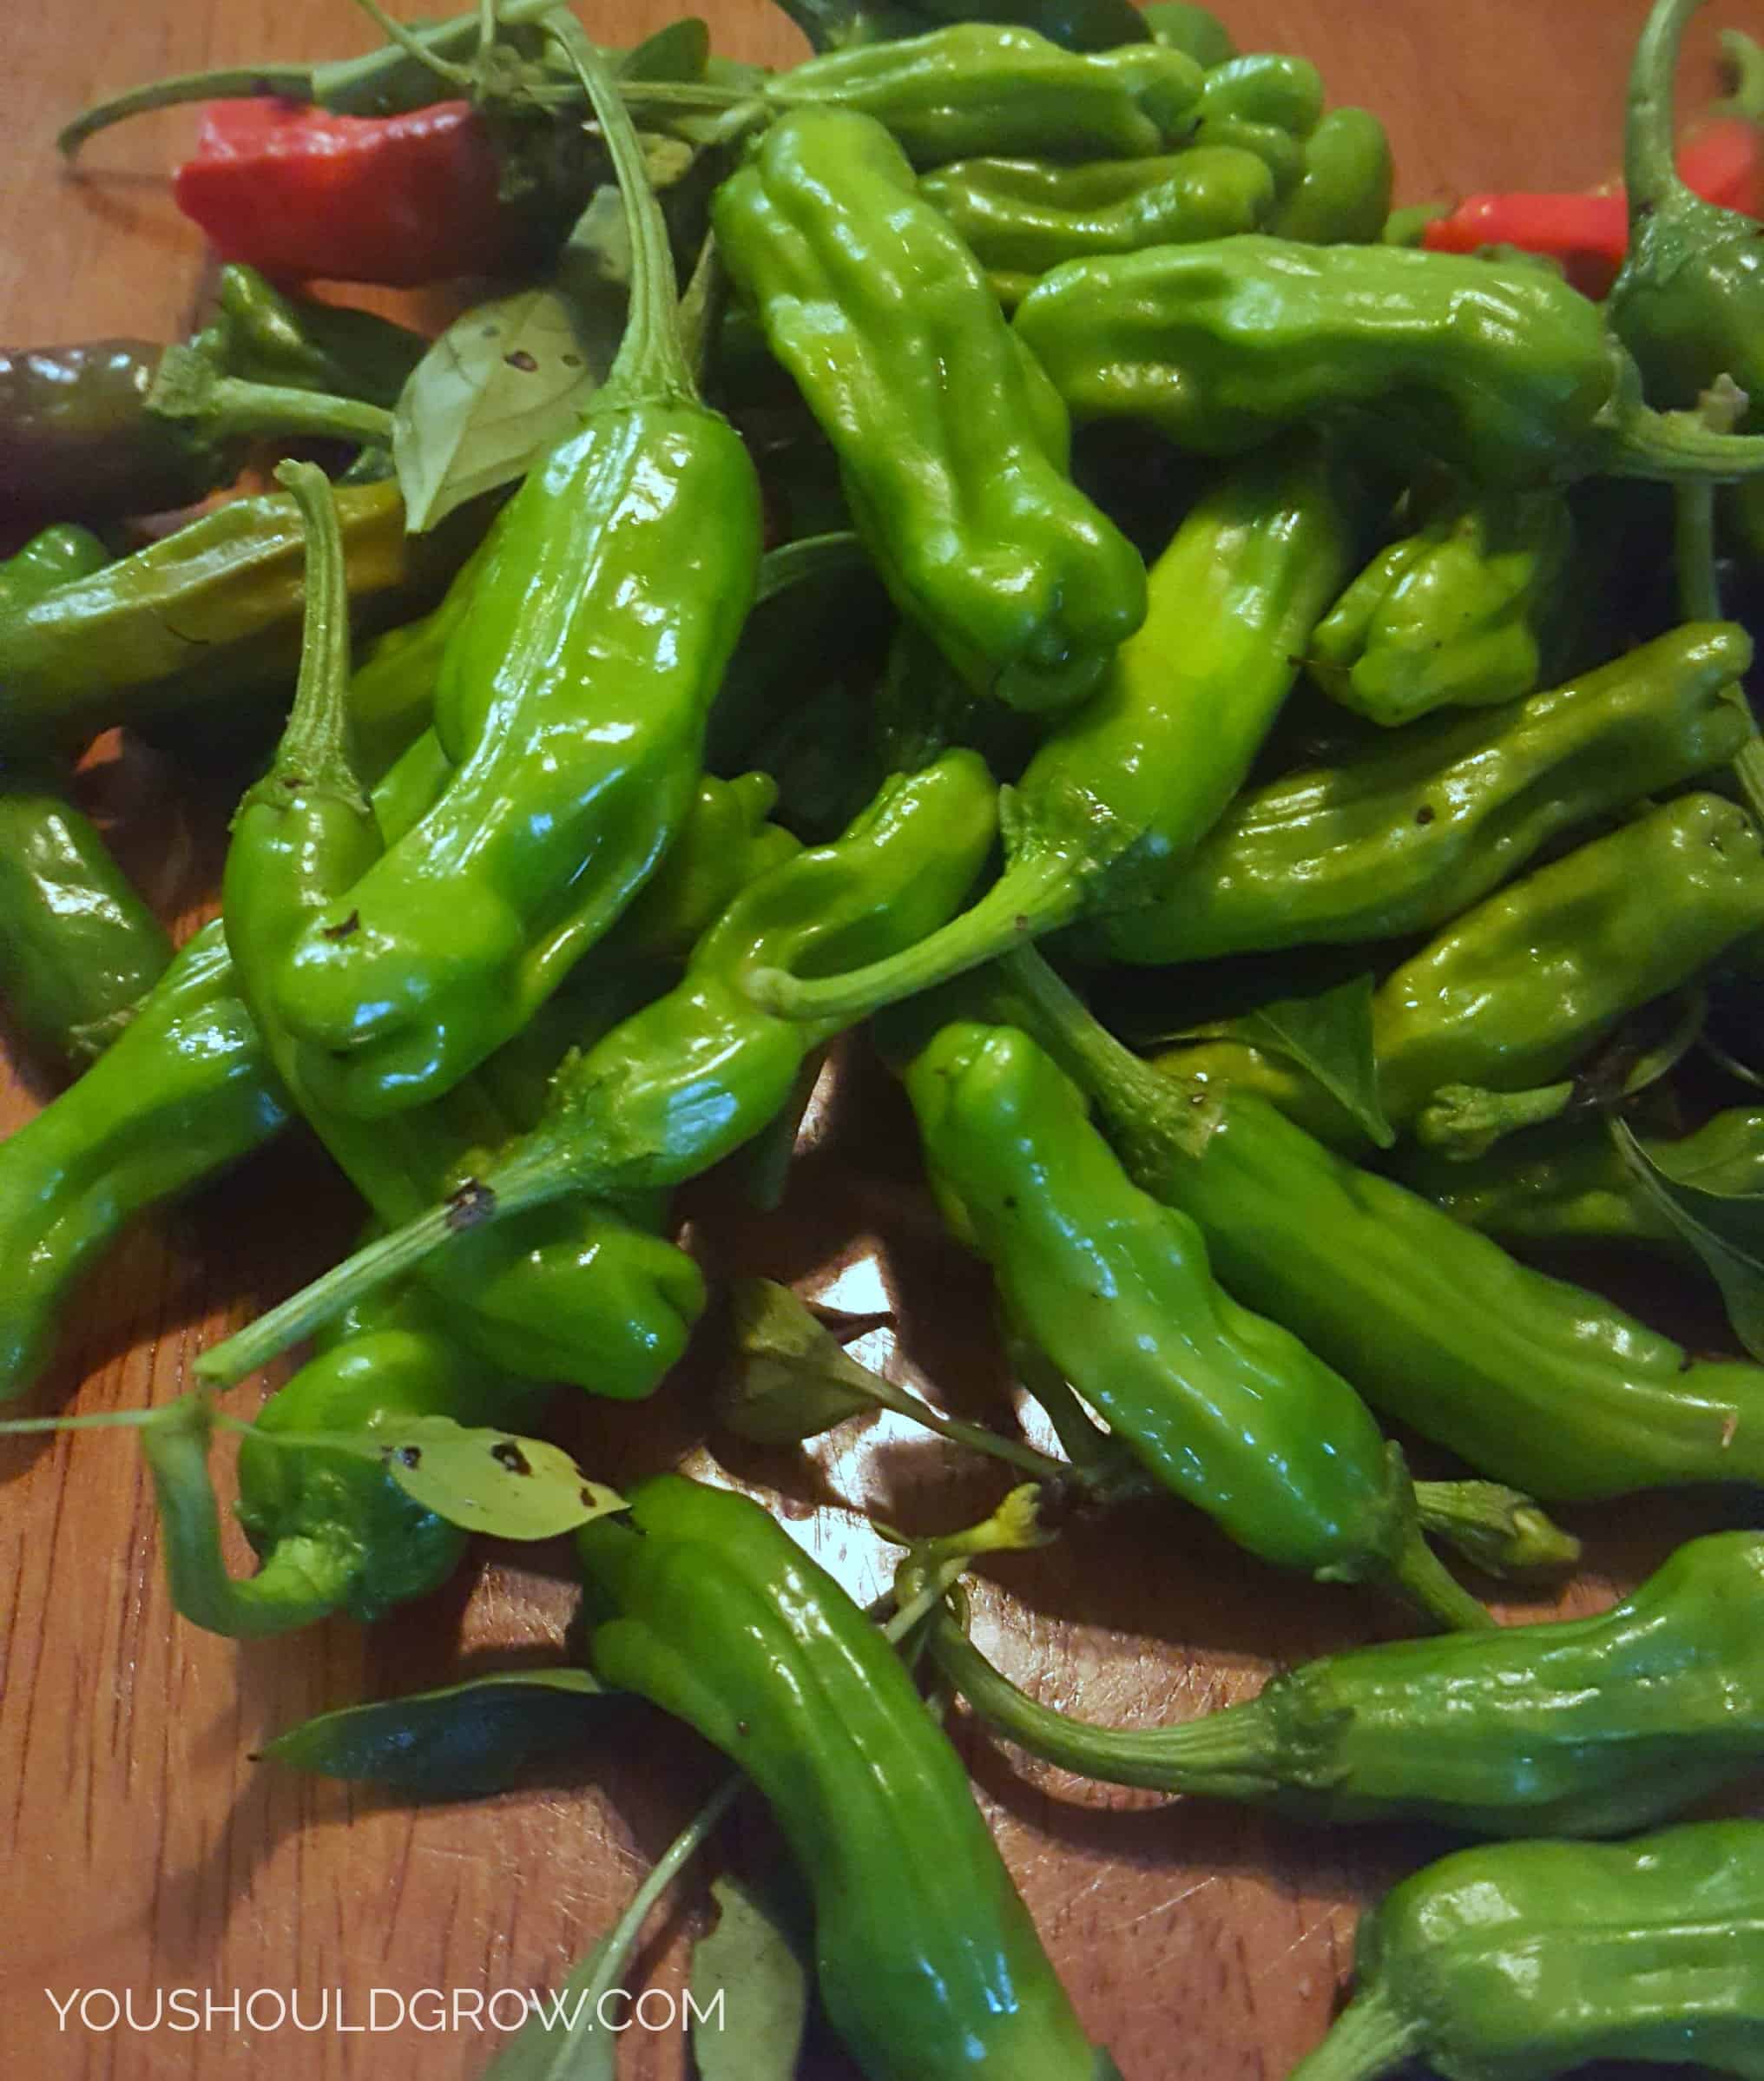 Shishito peppers are a sweet pepper with bright green skin and deep wrinkles.